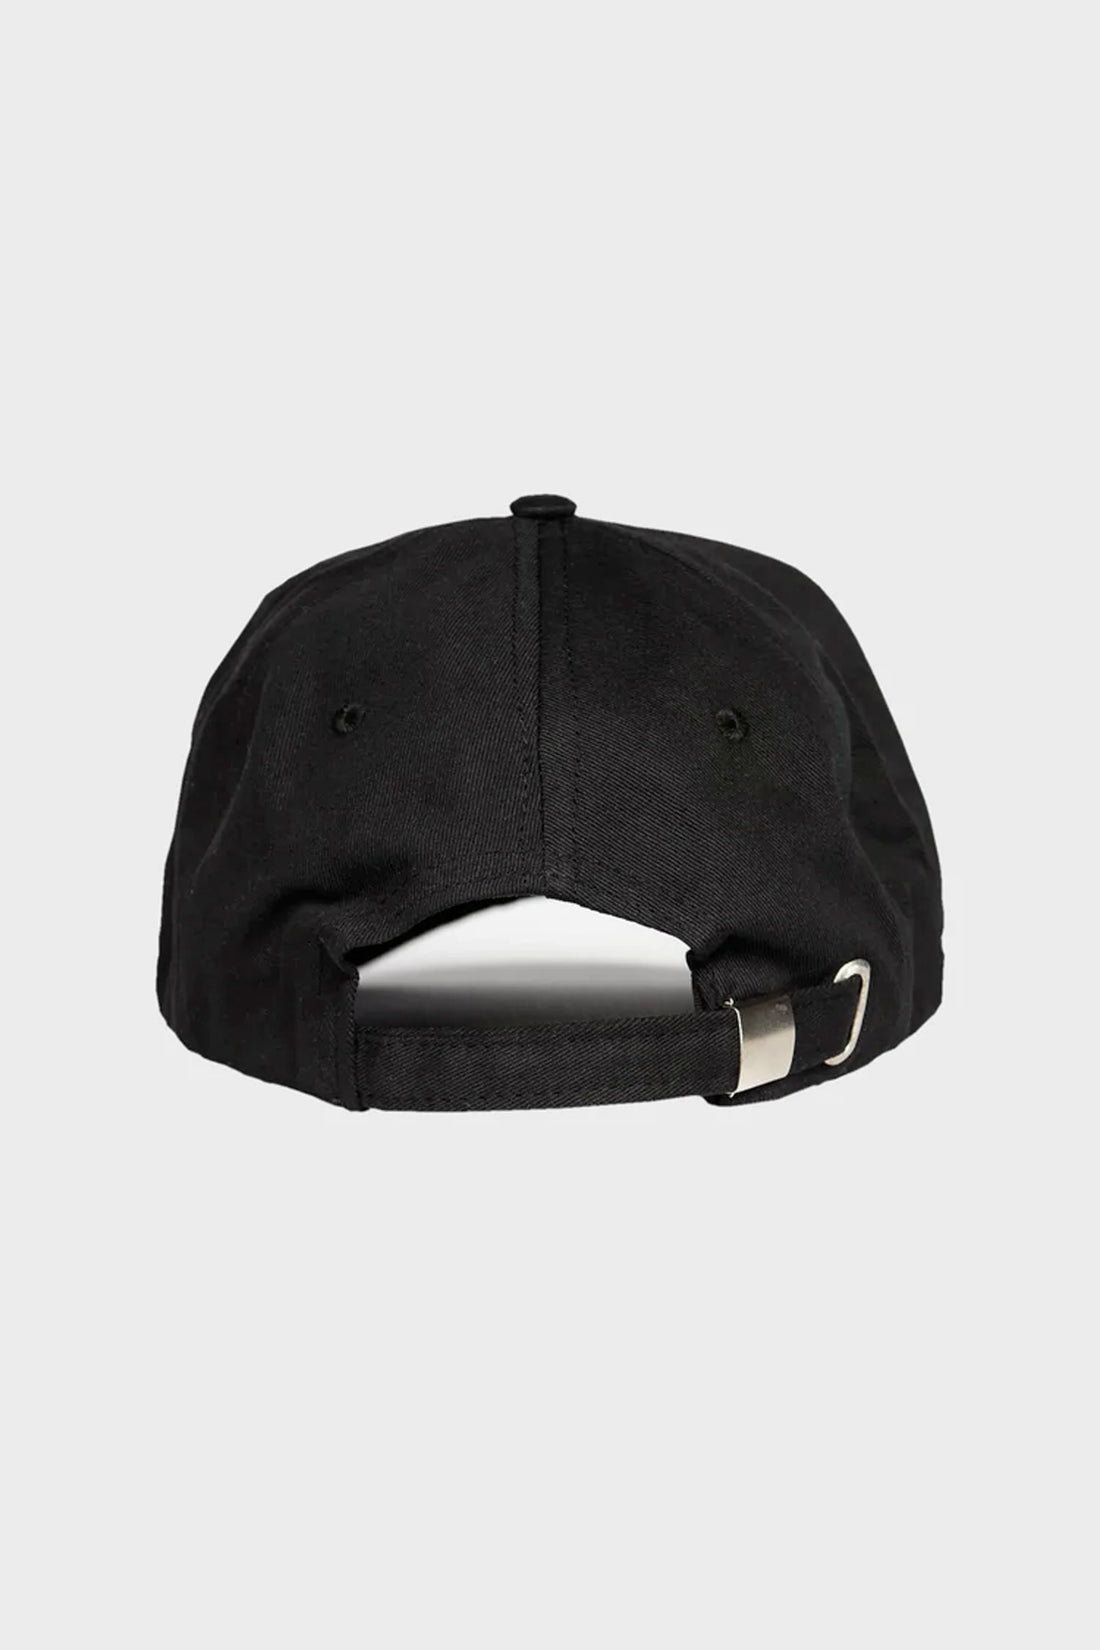 HERE TO STAY RATT DAD HAT